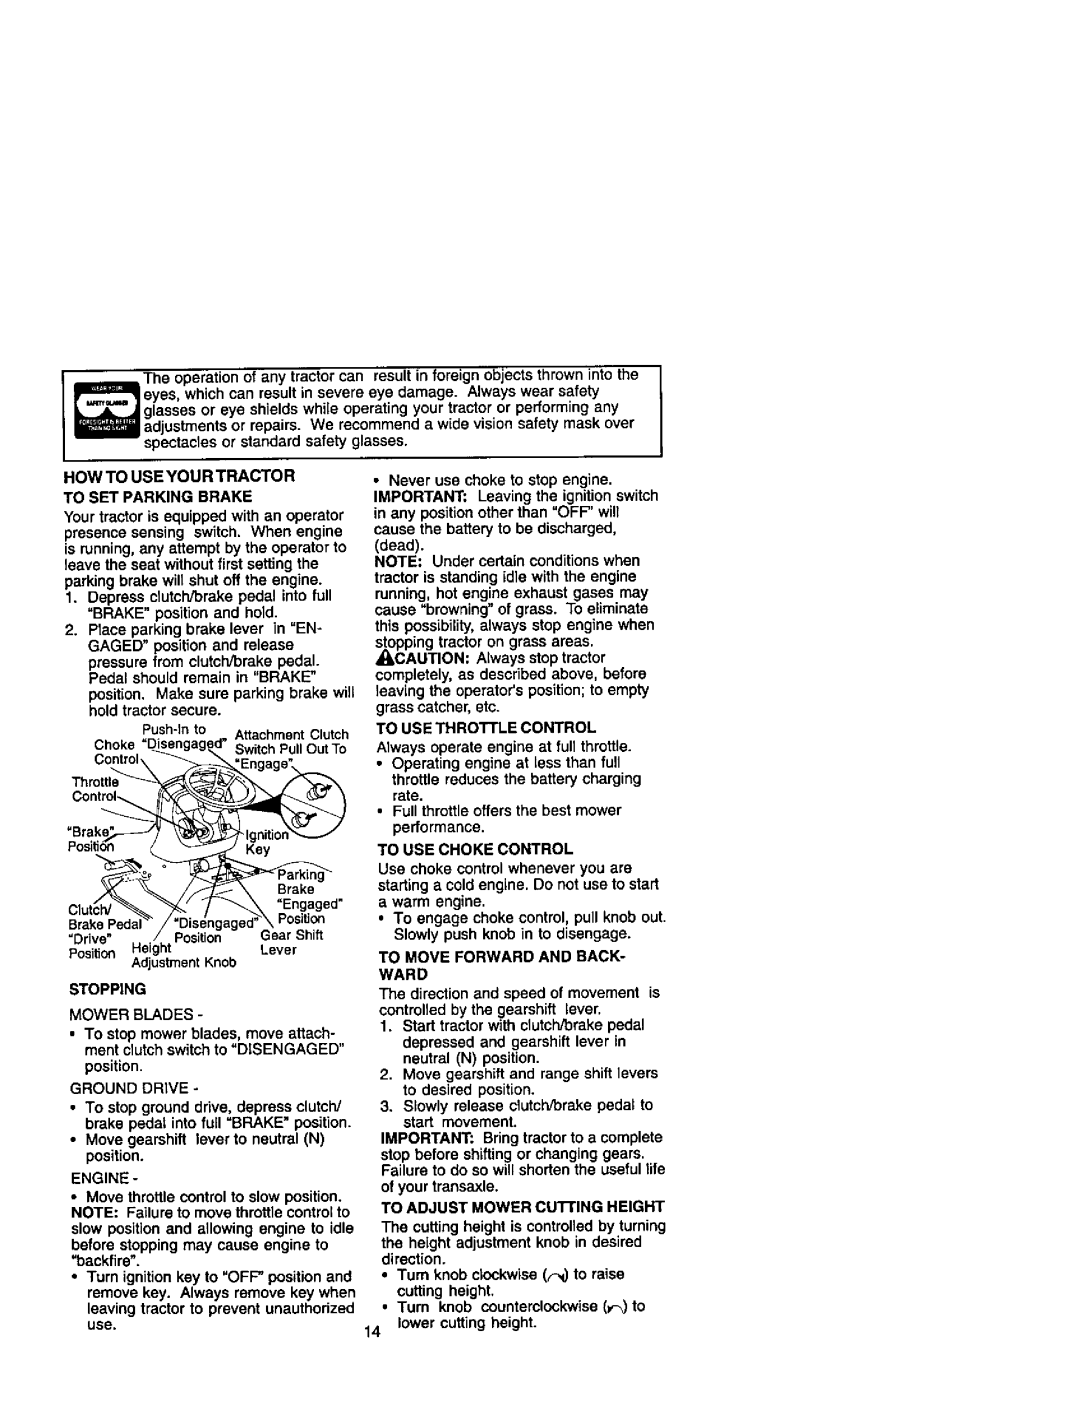 Craftsman 917.27499 manual How To Useyourtractor To Set Parking Brake 